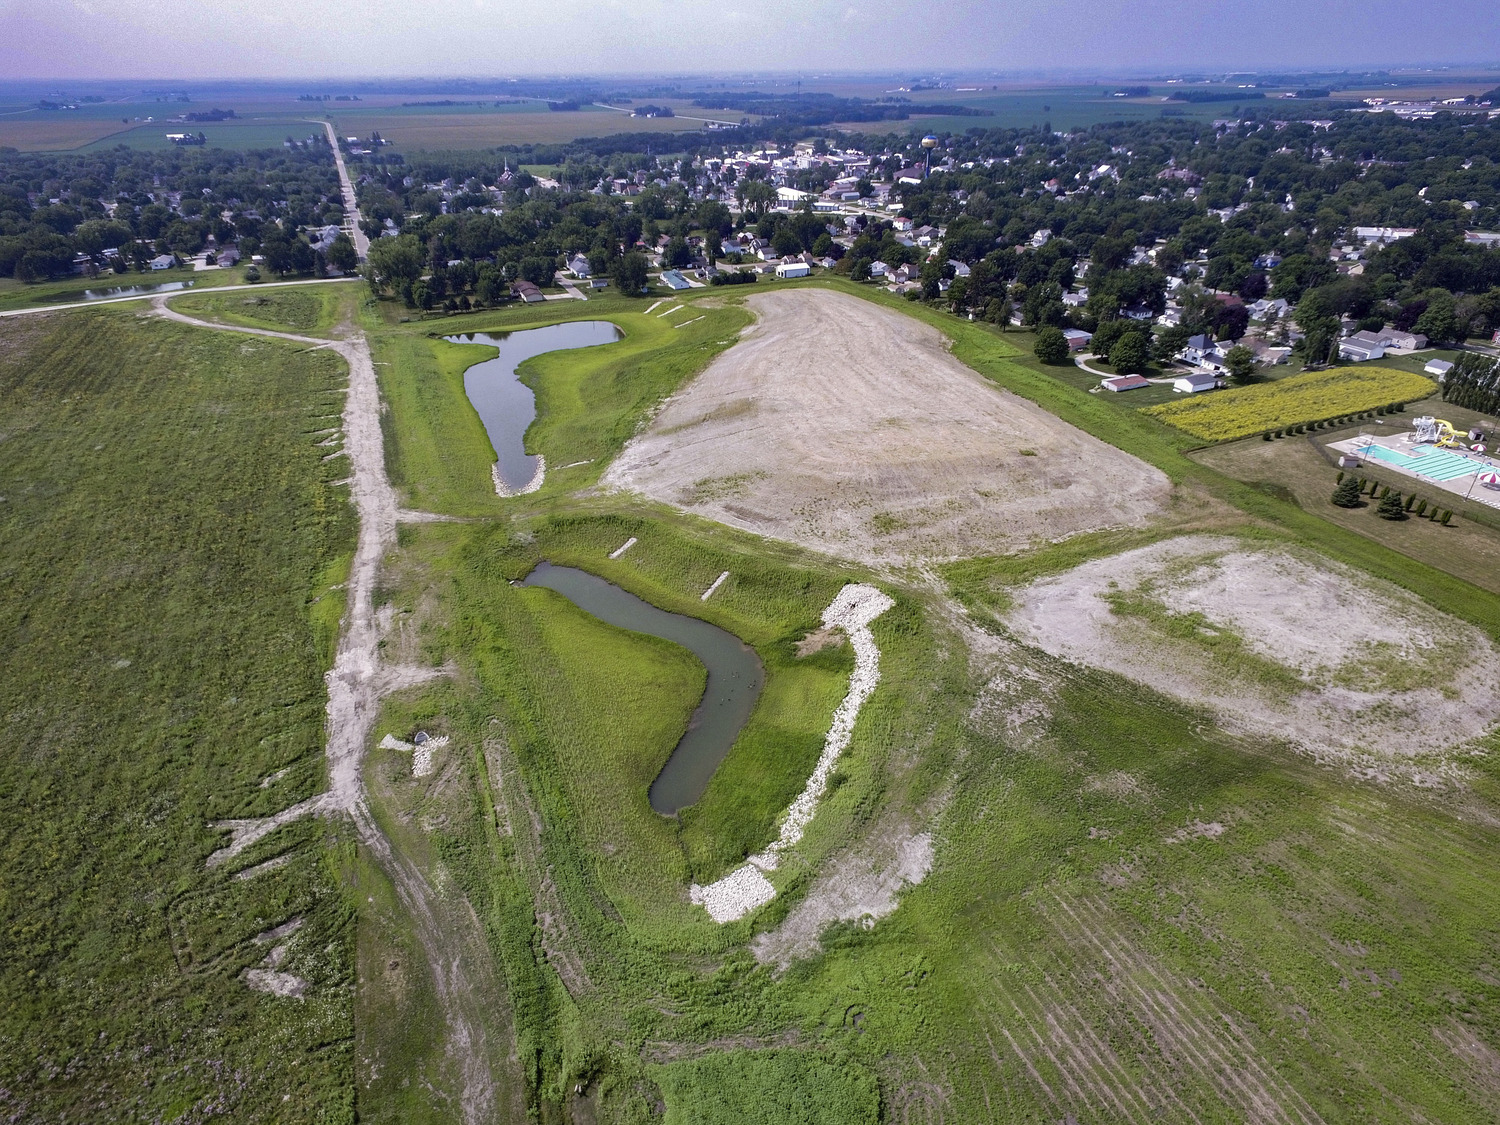 stormwater detention basins in Sumner, Iowa, were designed to blend into the topography